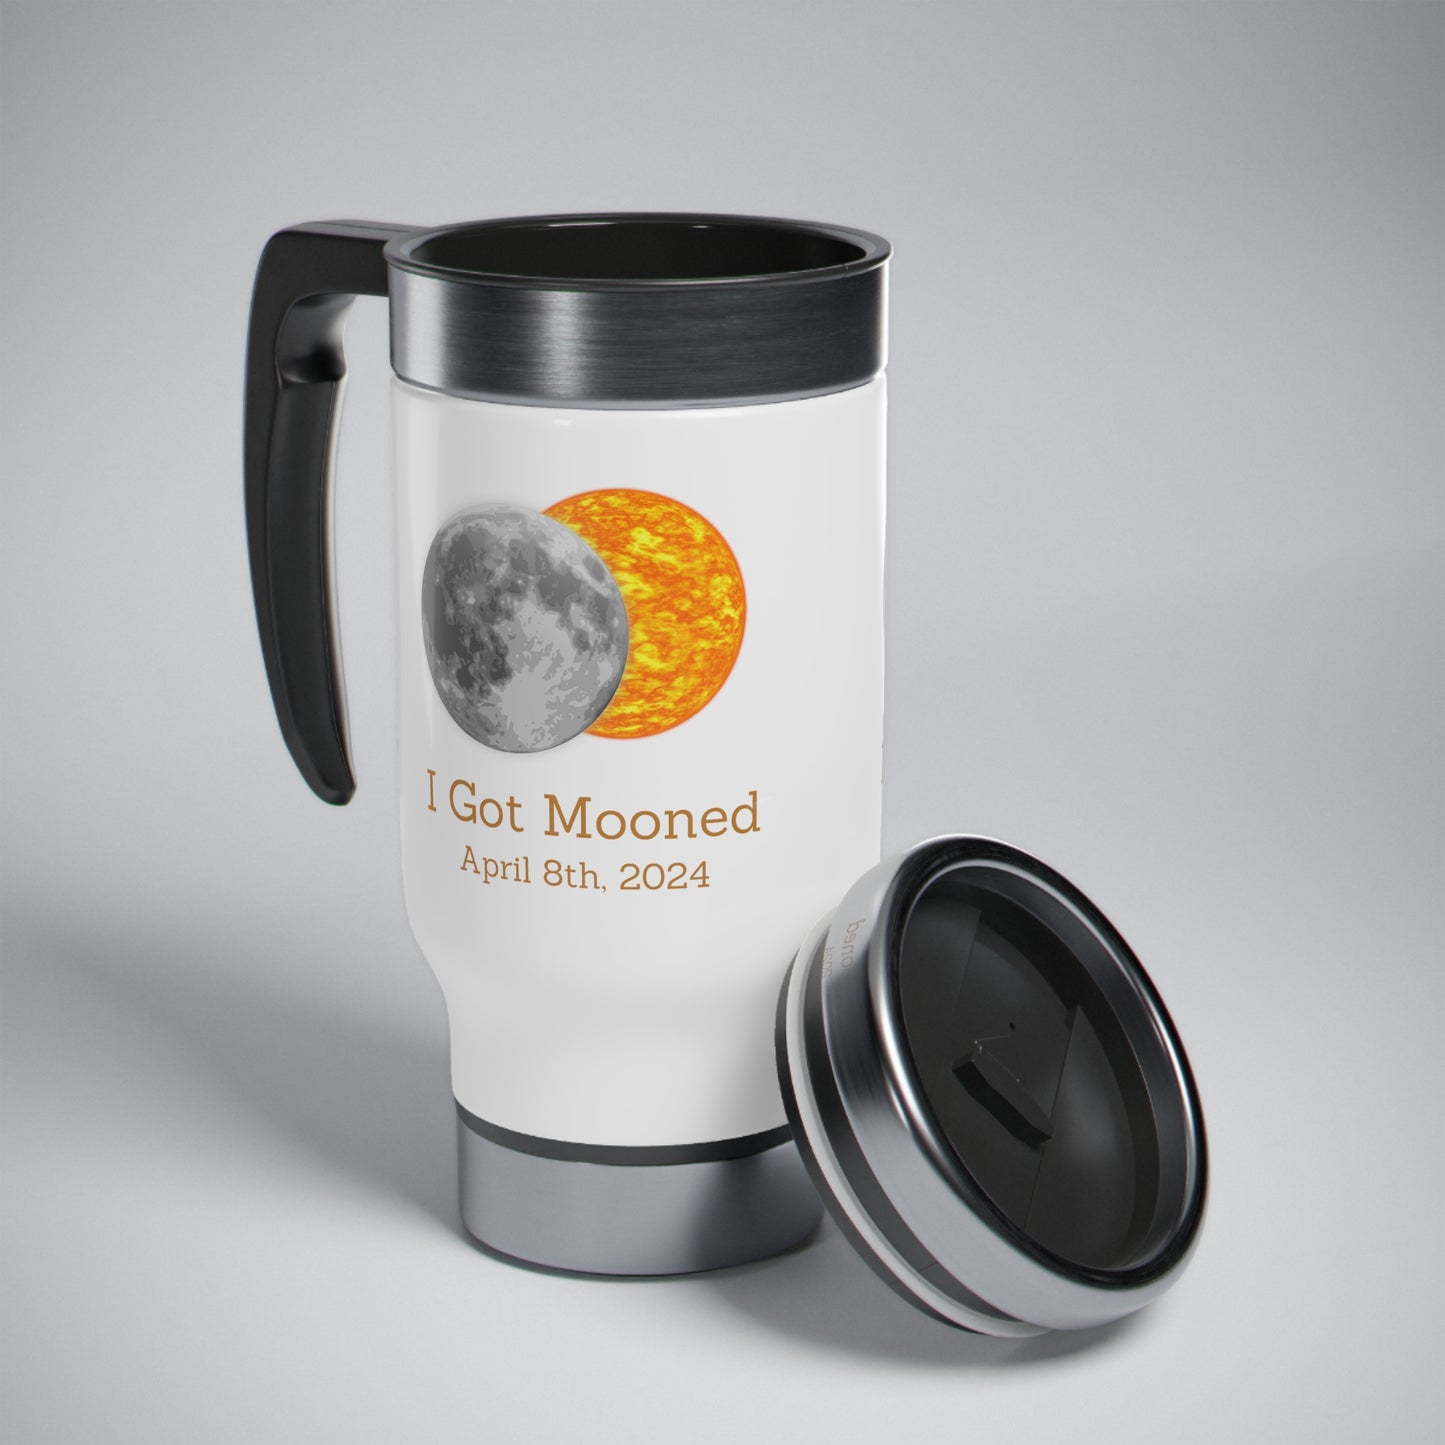 I Got Mooned Stainless Steel Travel Mug with Handle, 14oz